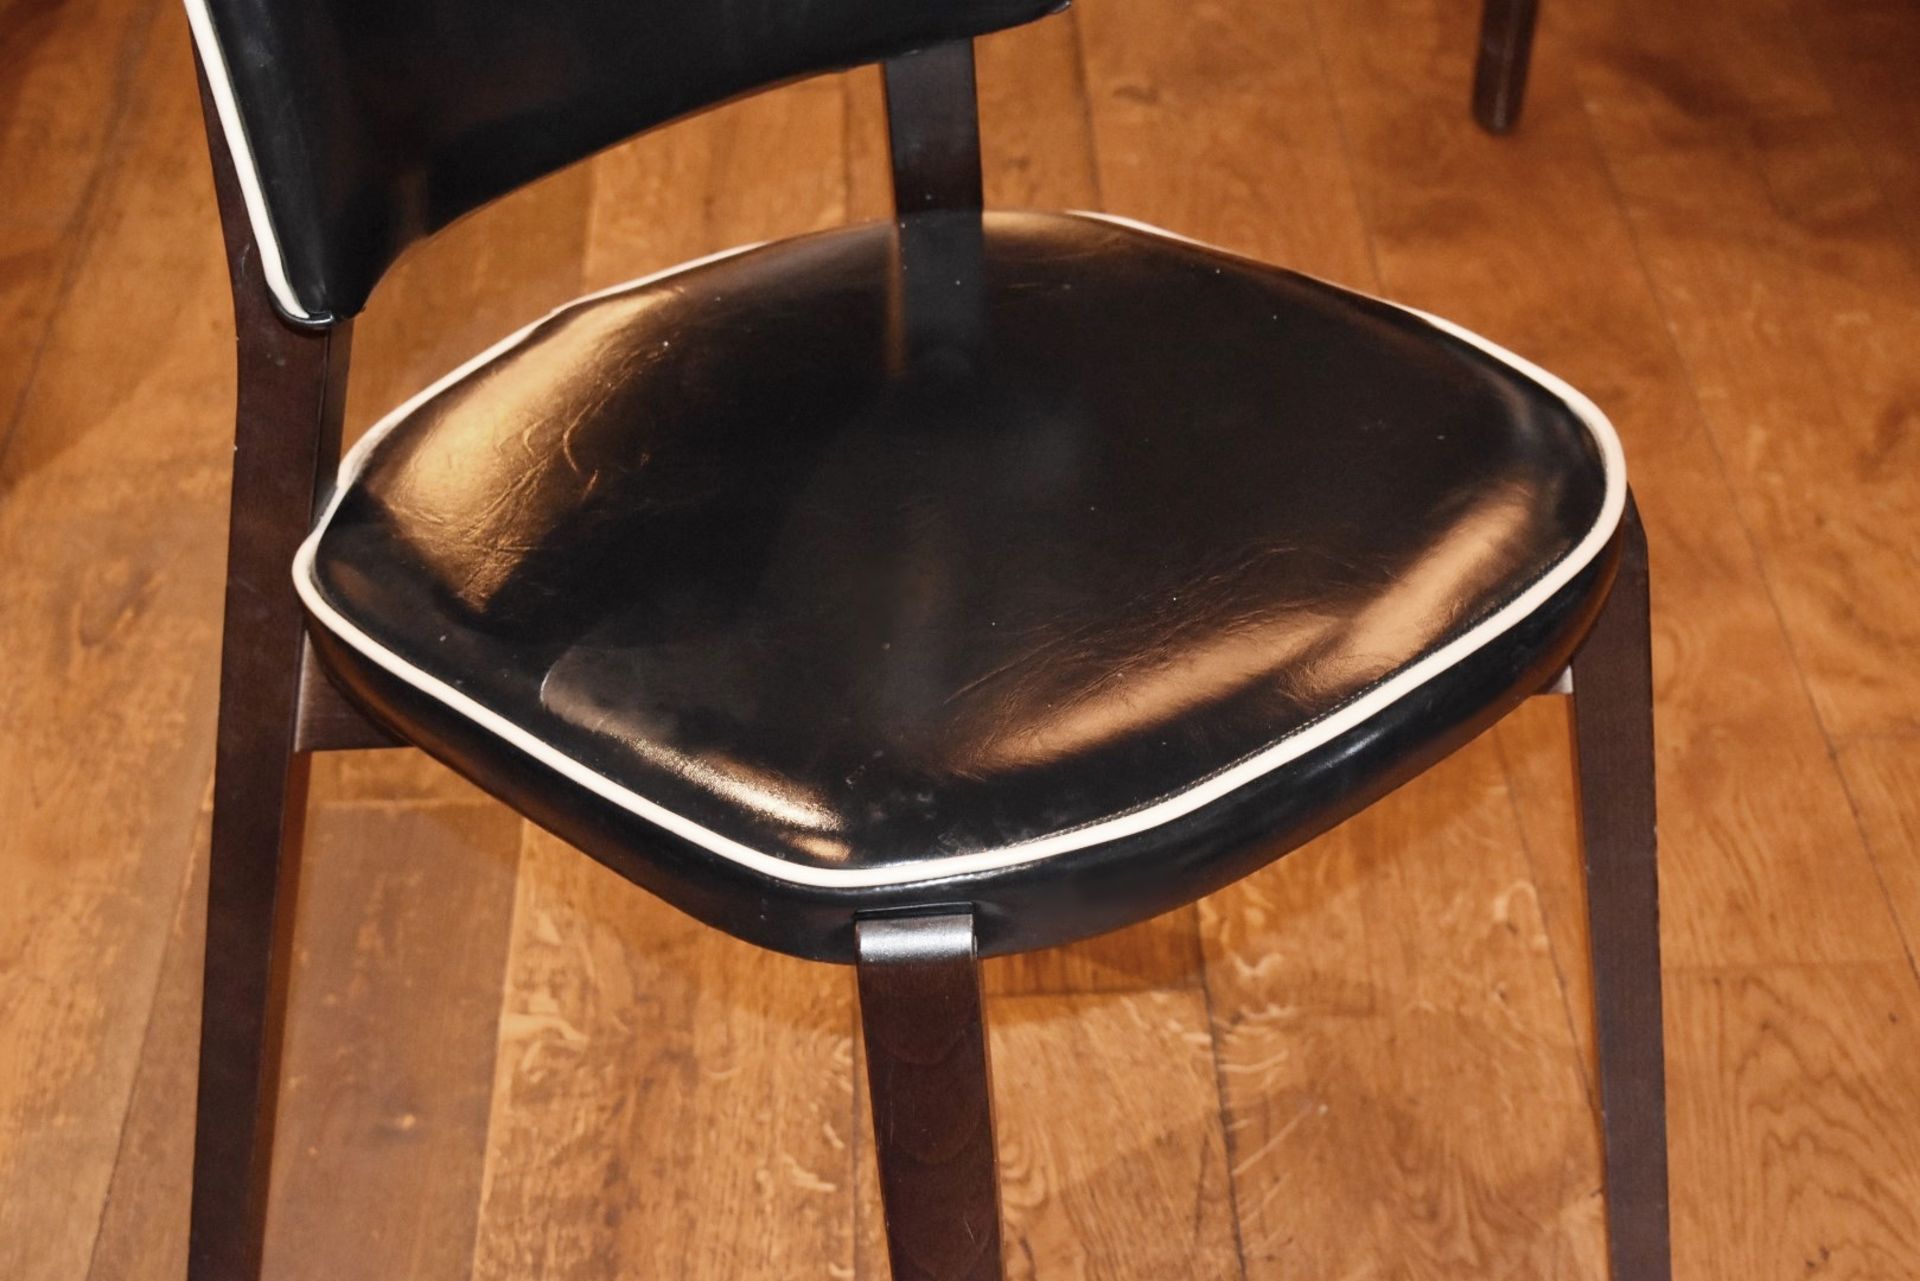 8 x Black Faux Leather Dining Chairs From Italian American Restaurant - Retro Design With Dark - Image 2 of 3